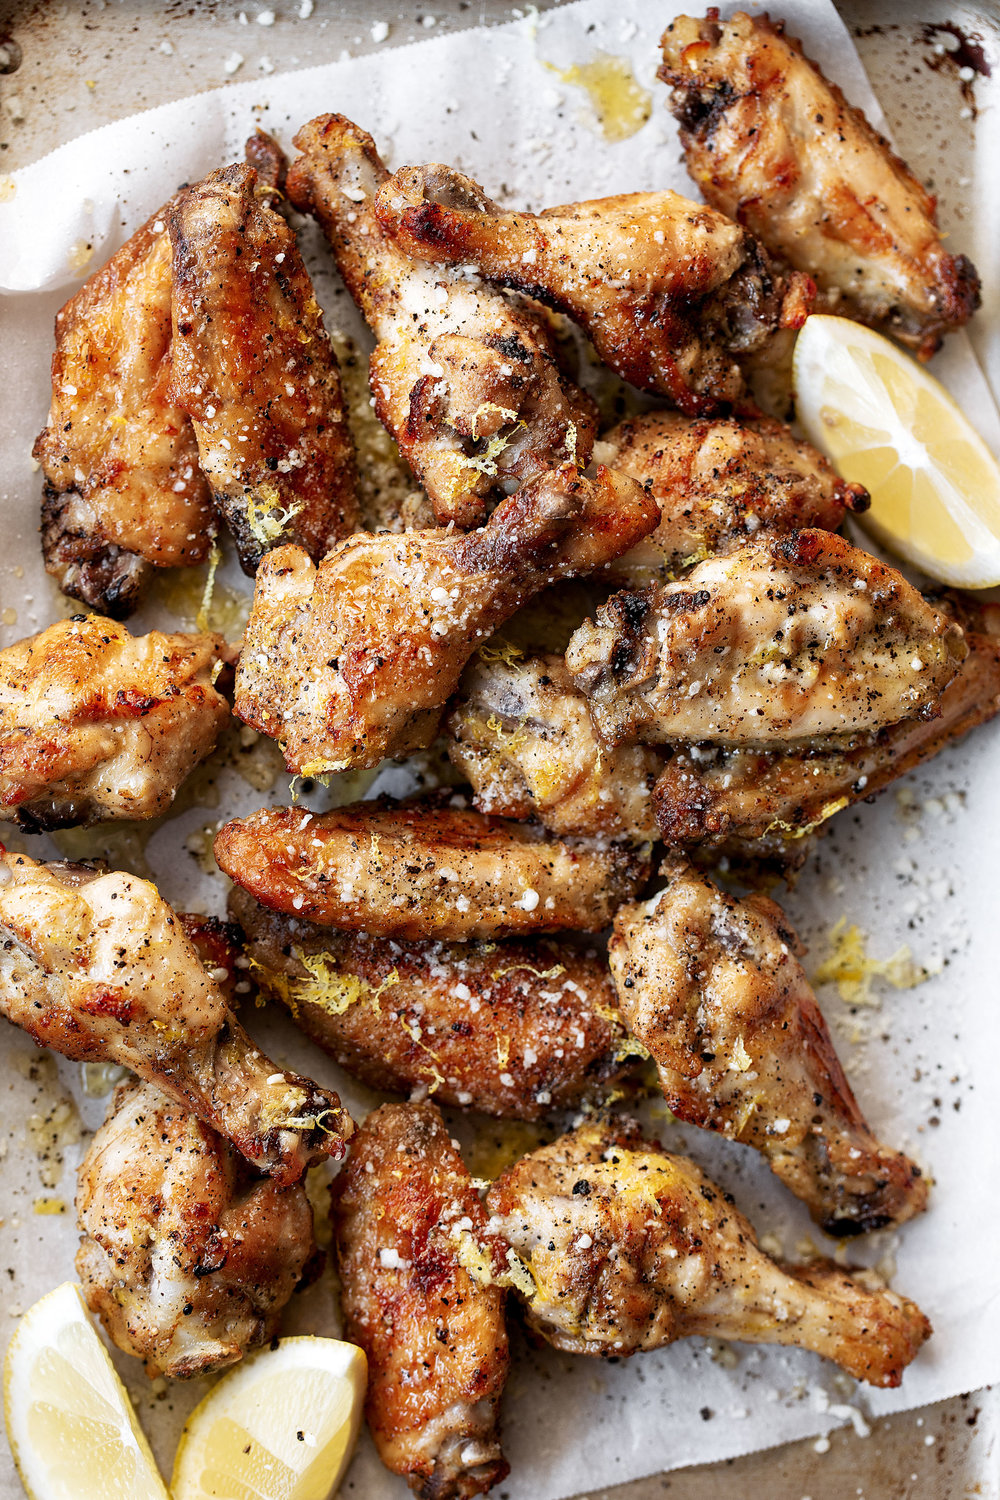 Baked Lemon Black Pepper Wings recipe from cooking with cocktail rings